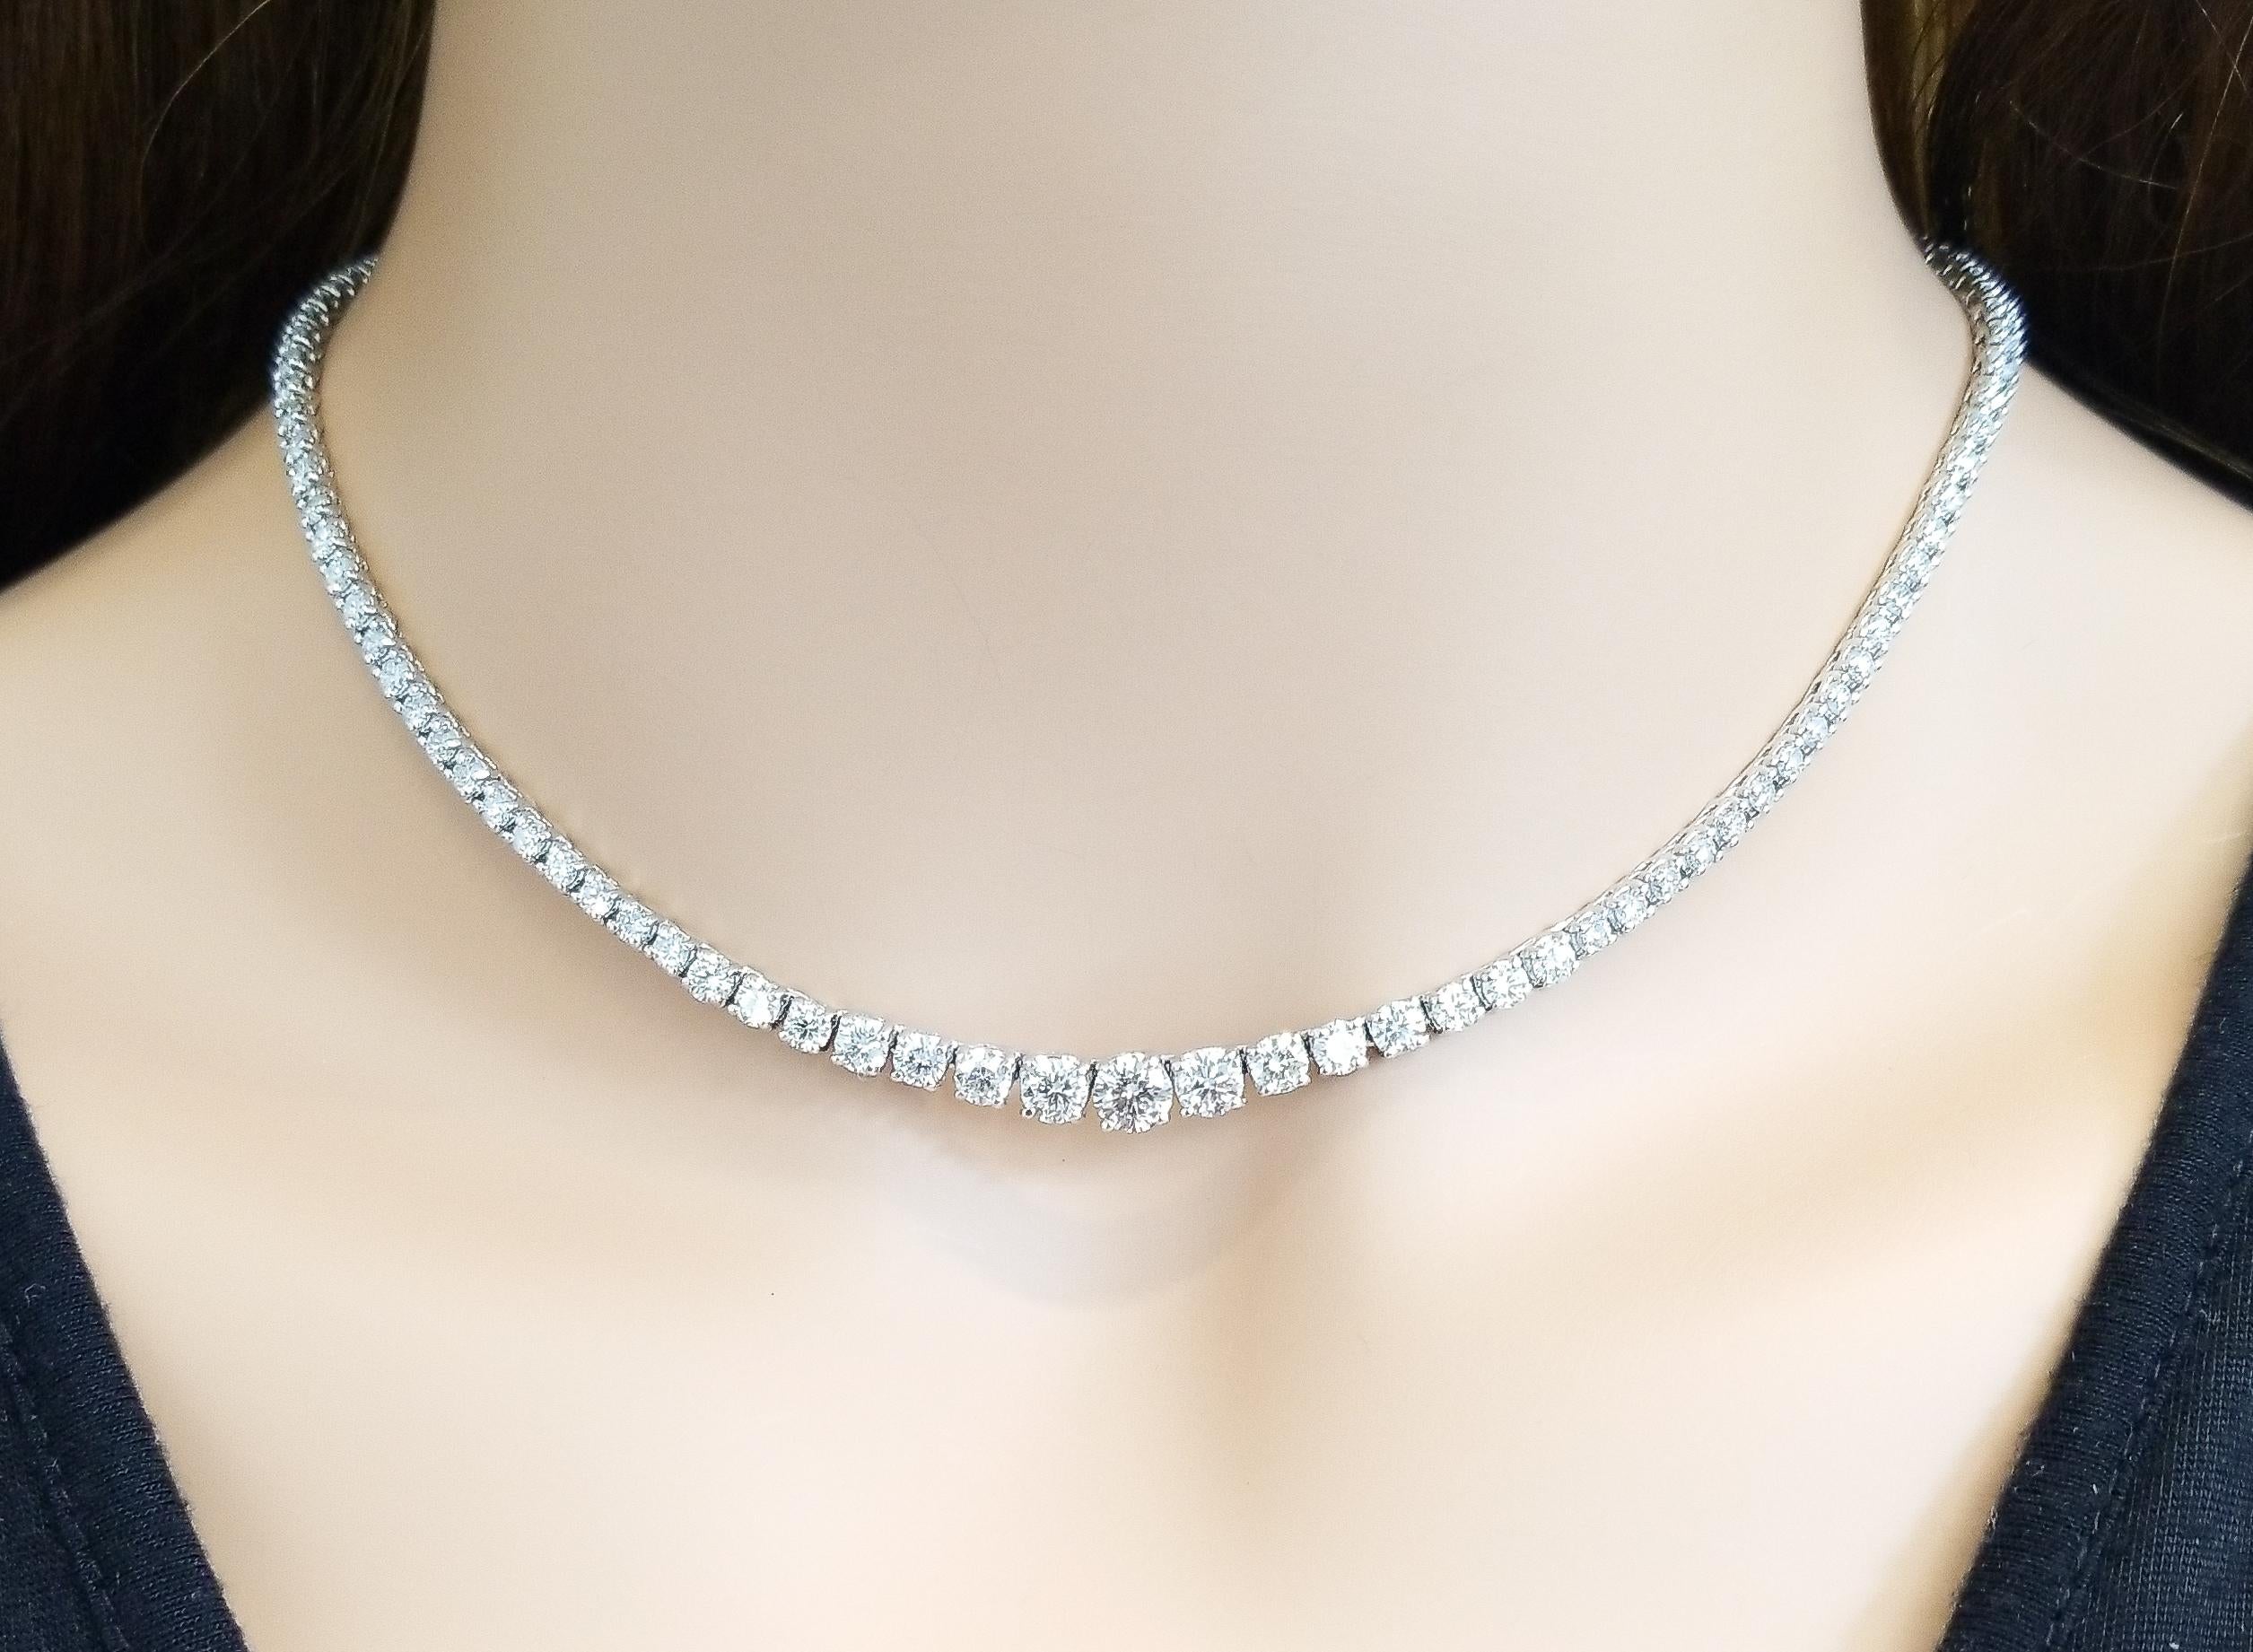 This is a riviera necklace that deserves attention. It's chic and timeless. Show-stopping in fire and brilliance, this incredible riviera necklace features 123 sparkling round brilliant cut diamonds that are skillfully prong set from end to end in a